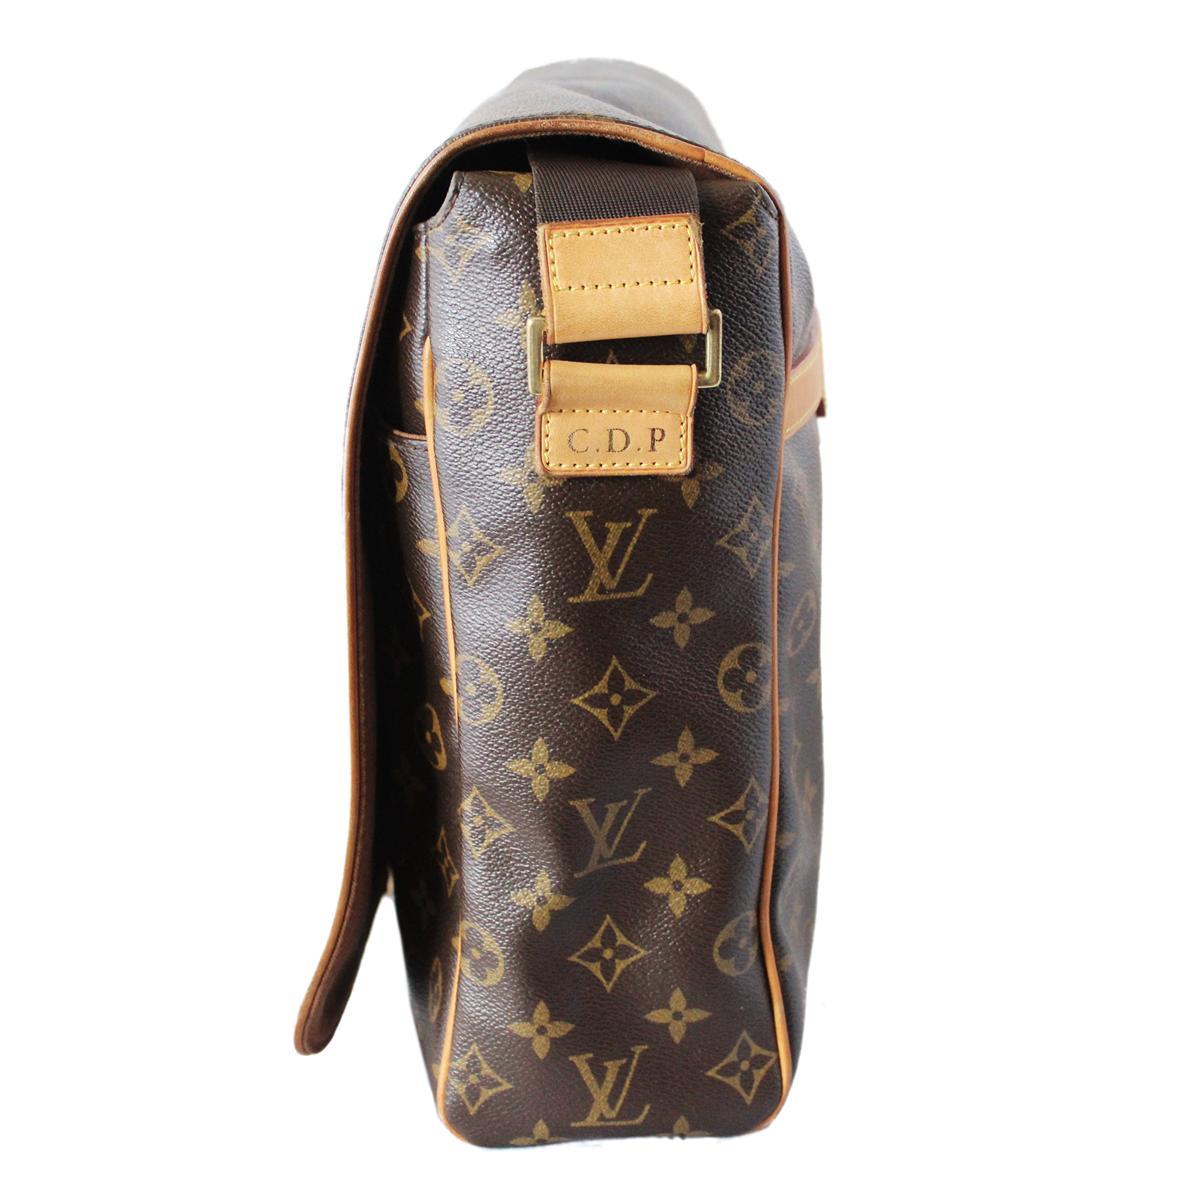 Beautiful and chic LV messenger bag
Year 2006
Monogram canvas
Extensible strap
Three external pockets
Two internal pockets and phone holder
Cm 36 x 30 x 10 (14.1 x 11.8 x 3.93 inches)
Original price  € 1720
Signed with CDP letters
Worldwide express